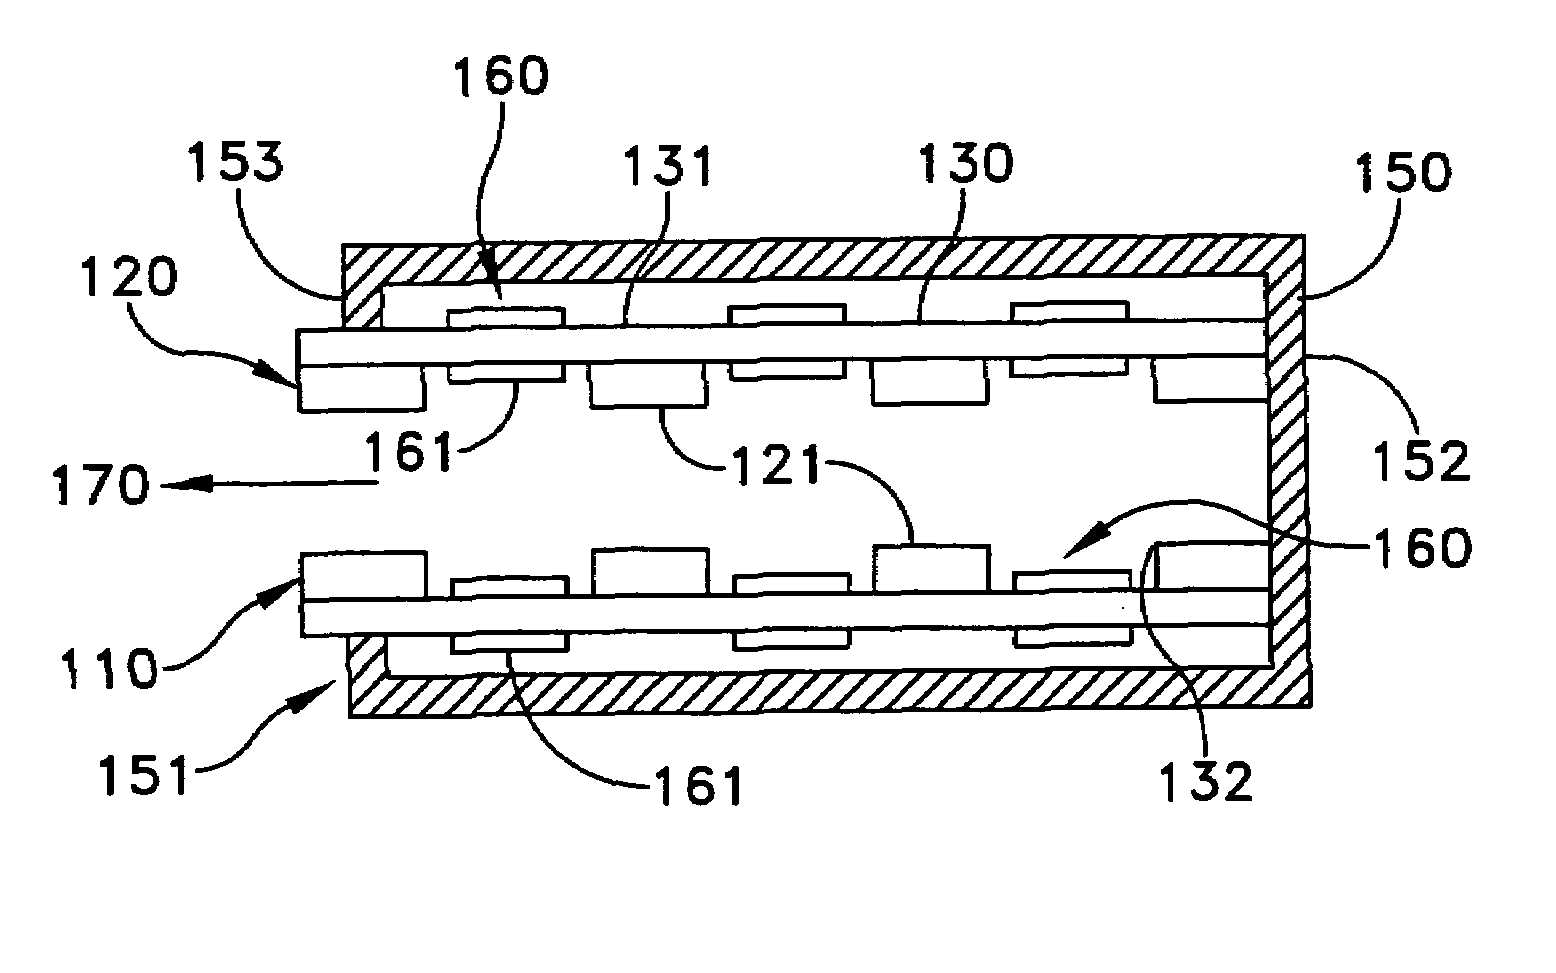 Handheld device having ultrasonic transducer for axial transmission of acoustic signals